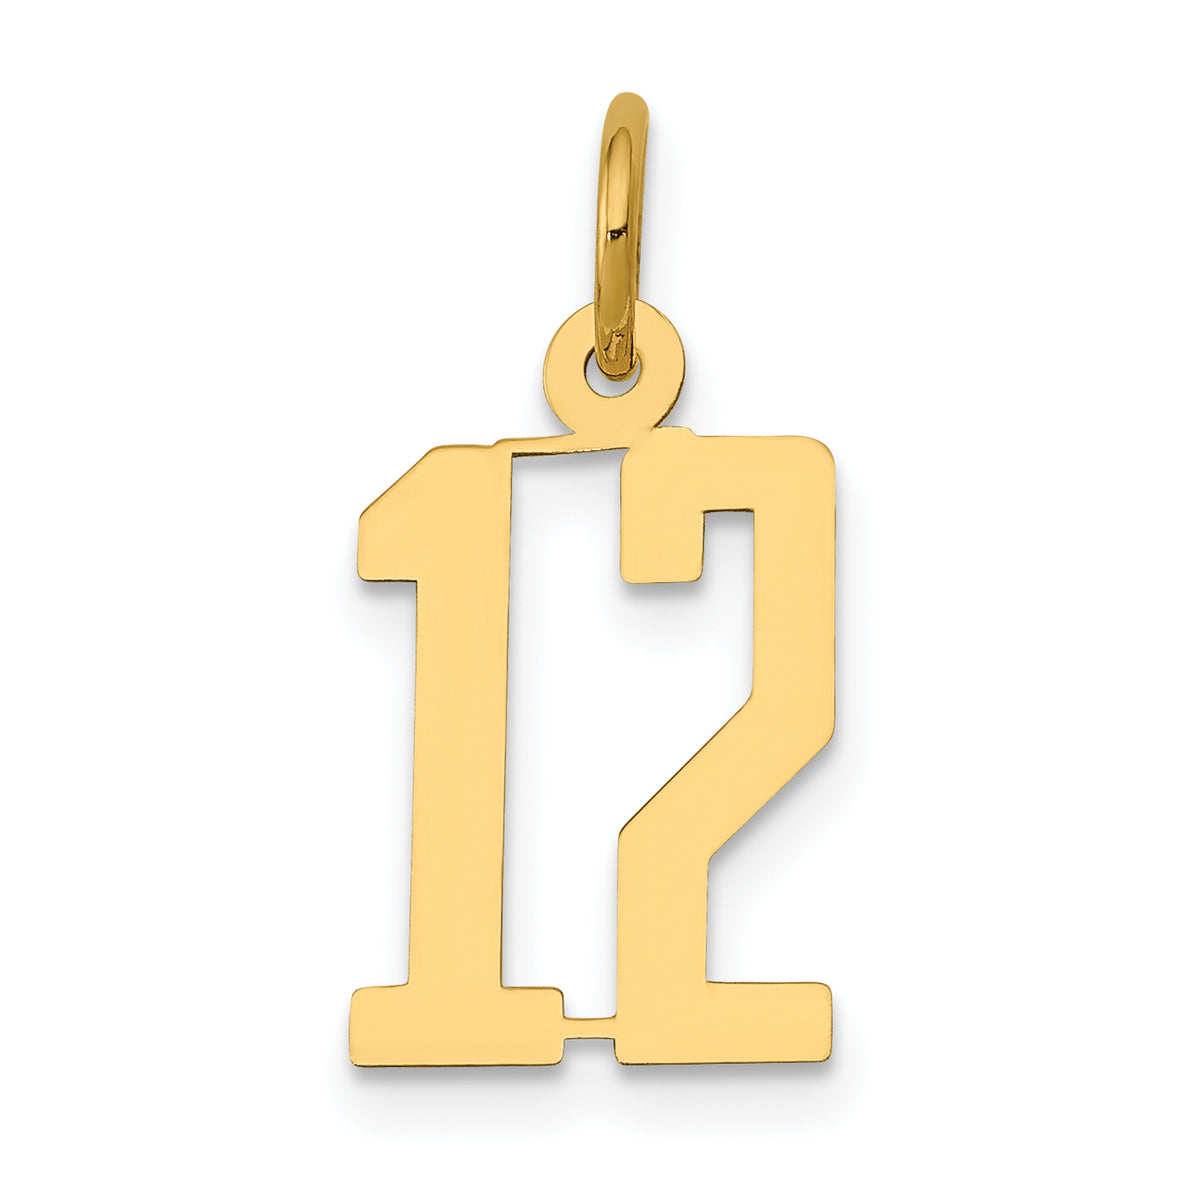 14k Small Elongated Number 12 Charm